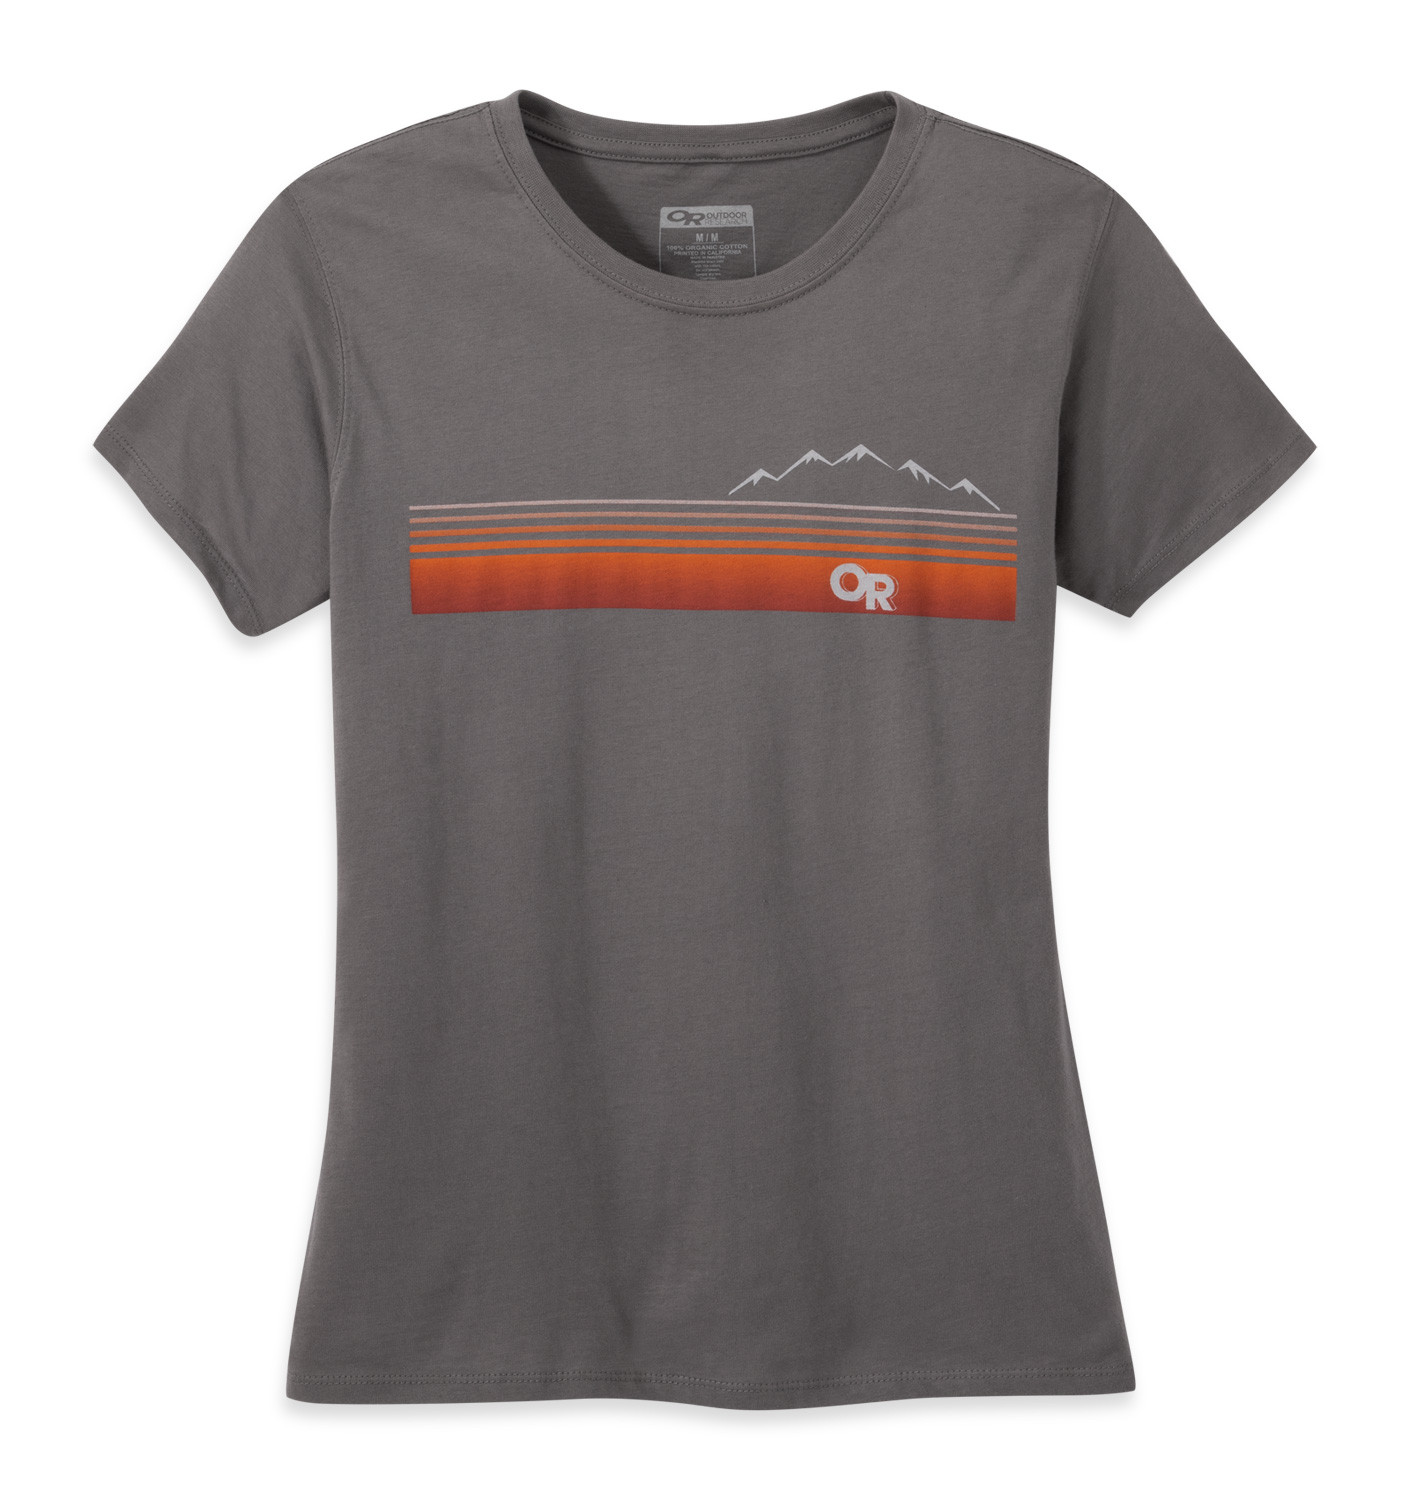 Outdoor Research Women's Ally S/S Tee, charcoal - L ▶ 40%